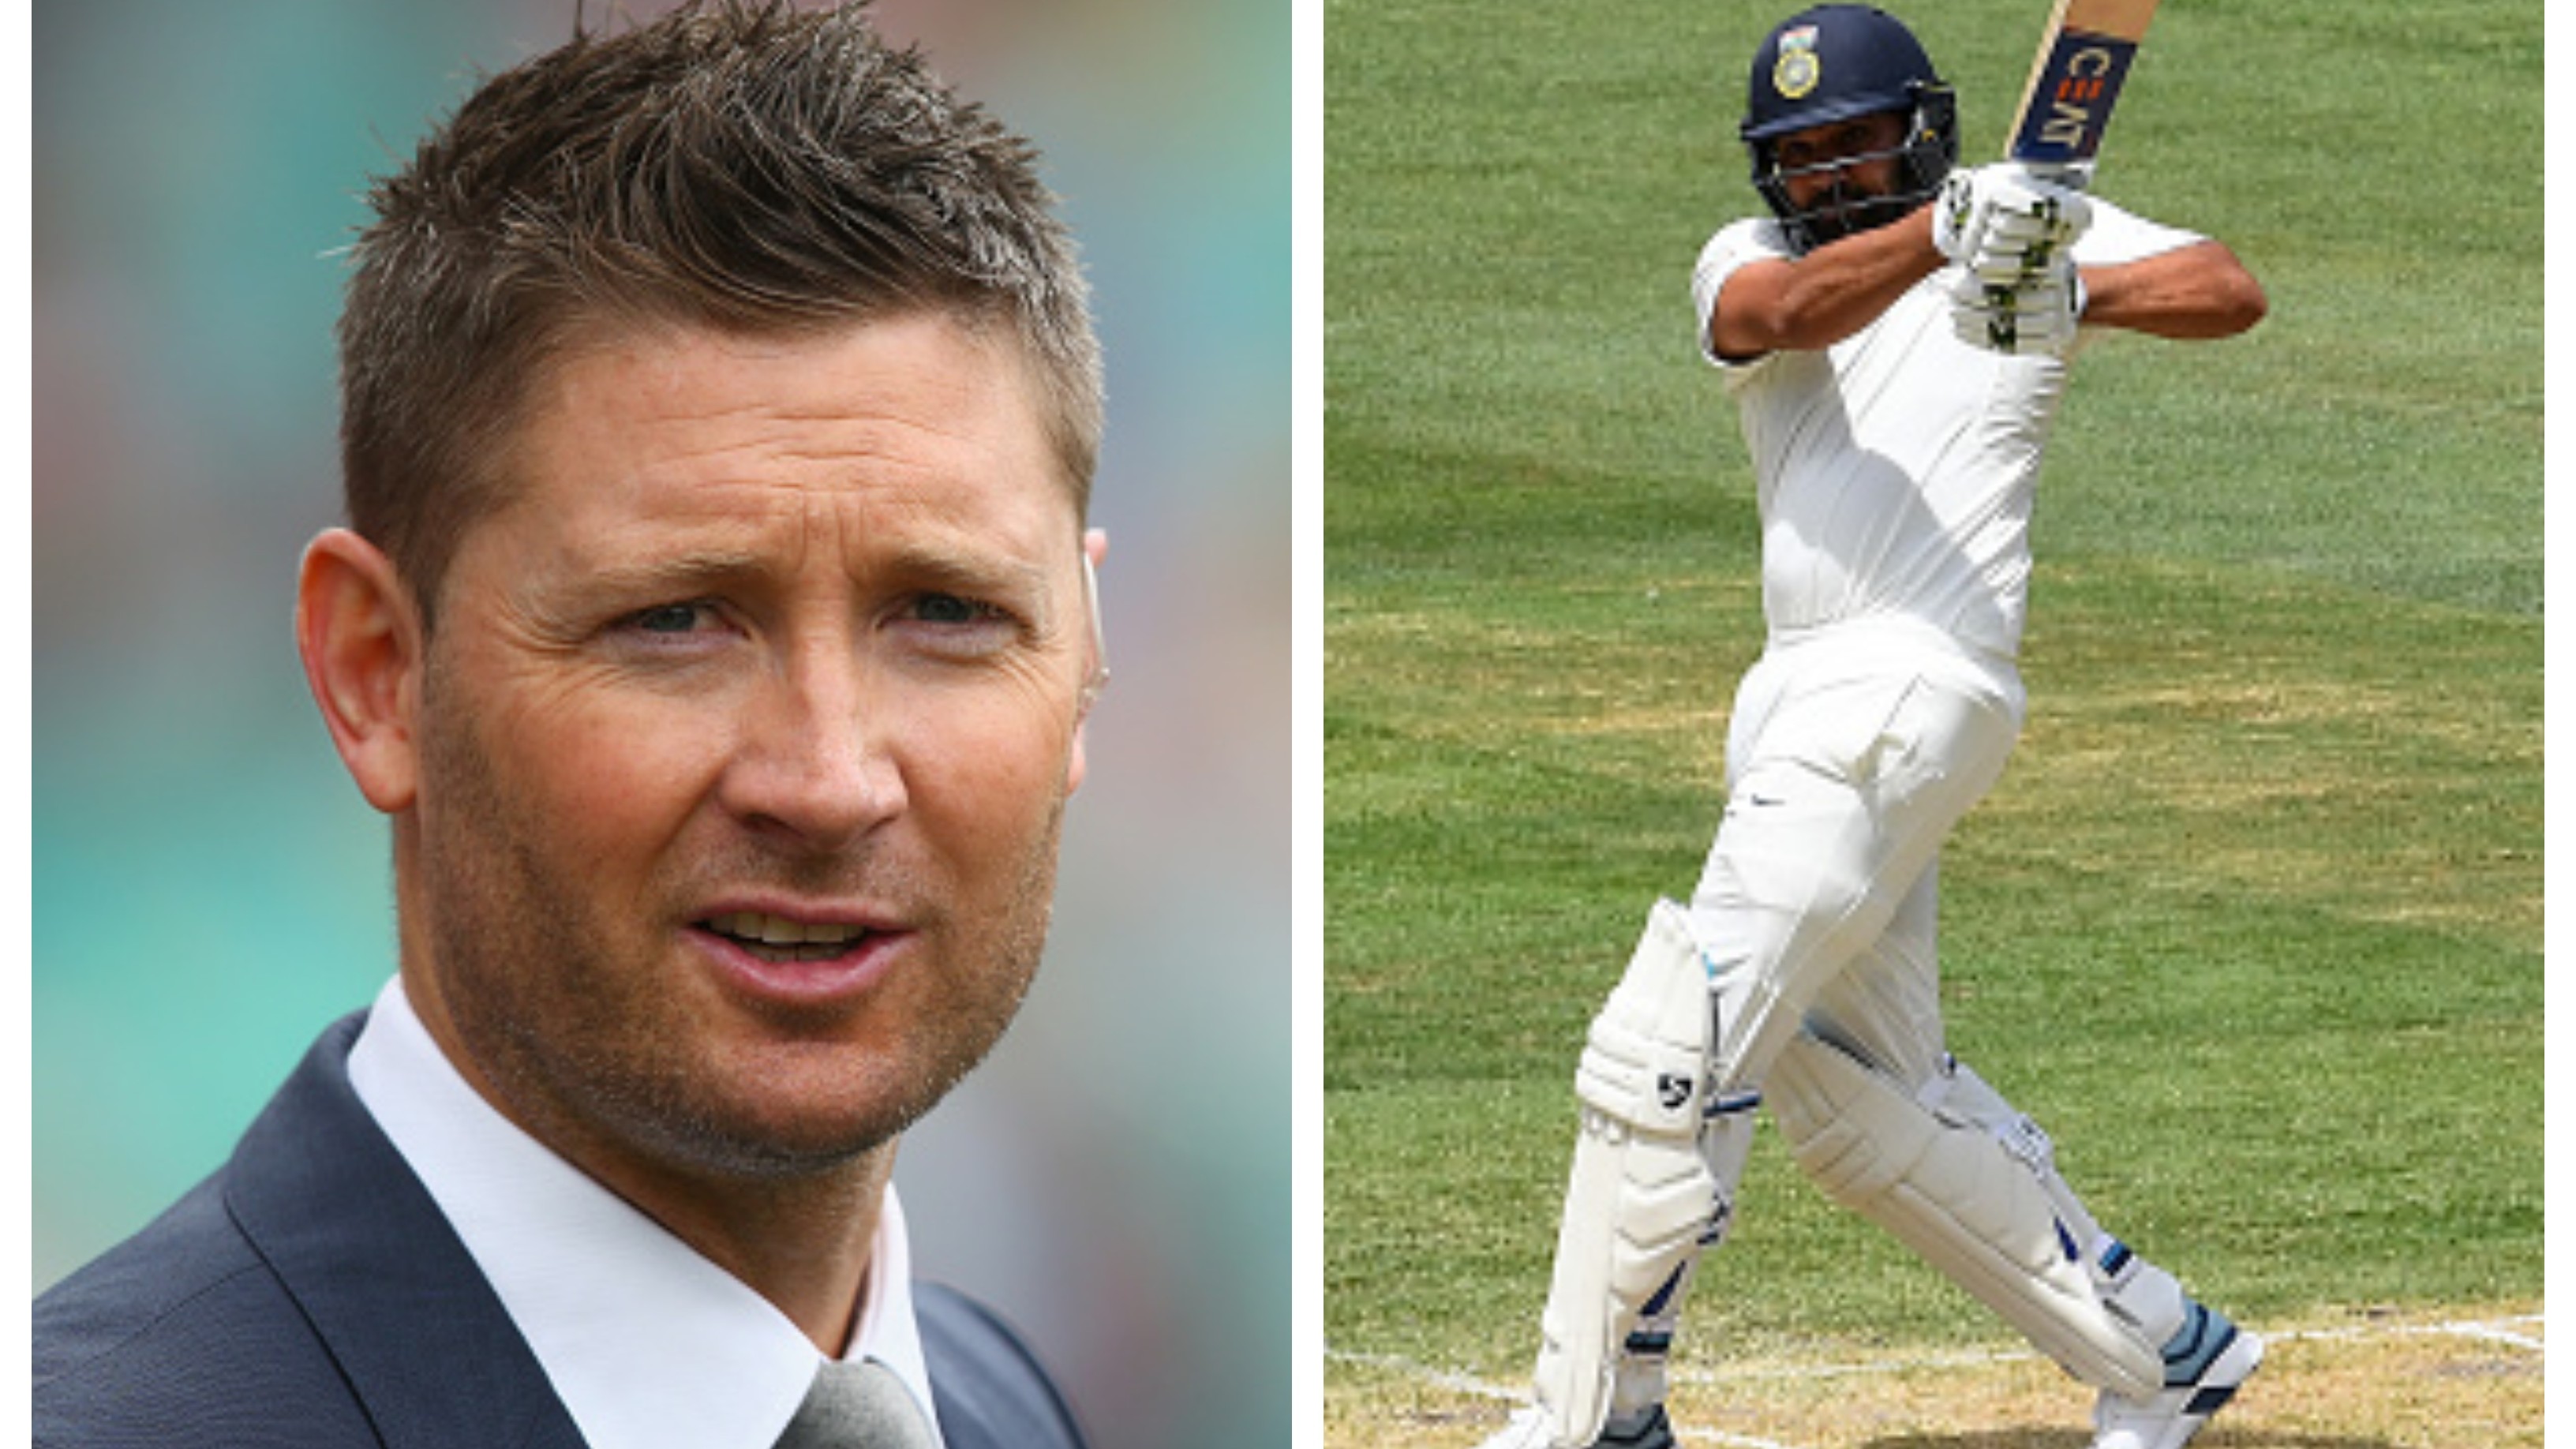 AUS v IND 2020-21: ‘Rohit should be captain of India in any format if Kohli is not there’, says Michael Clarke